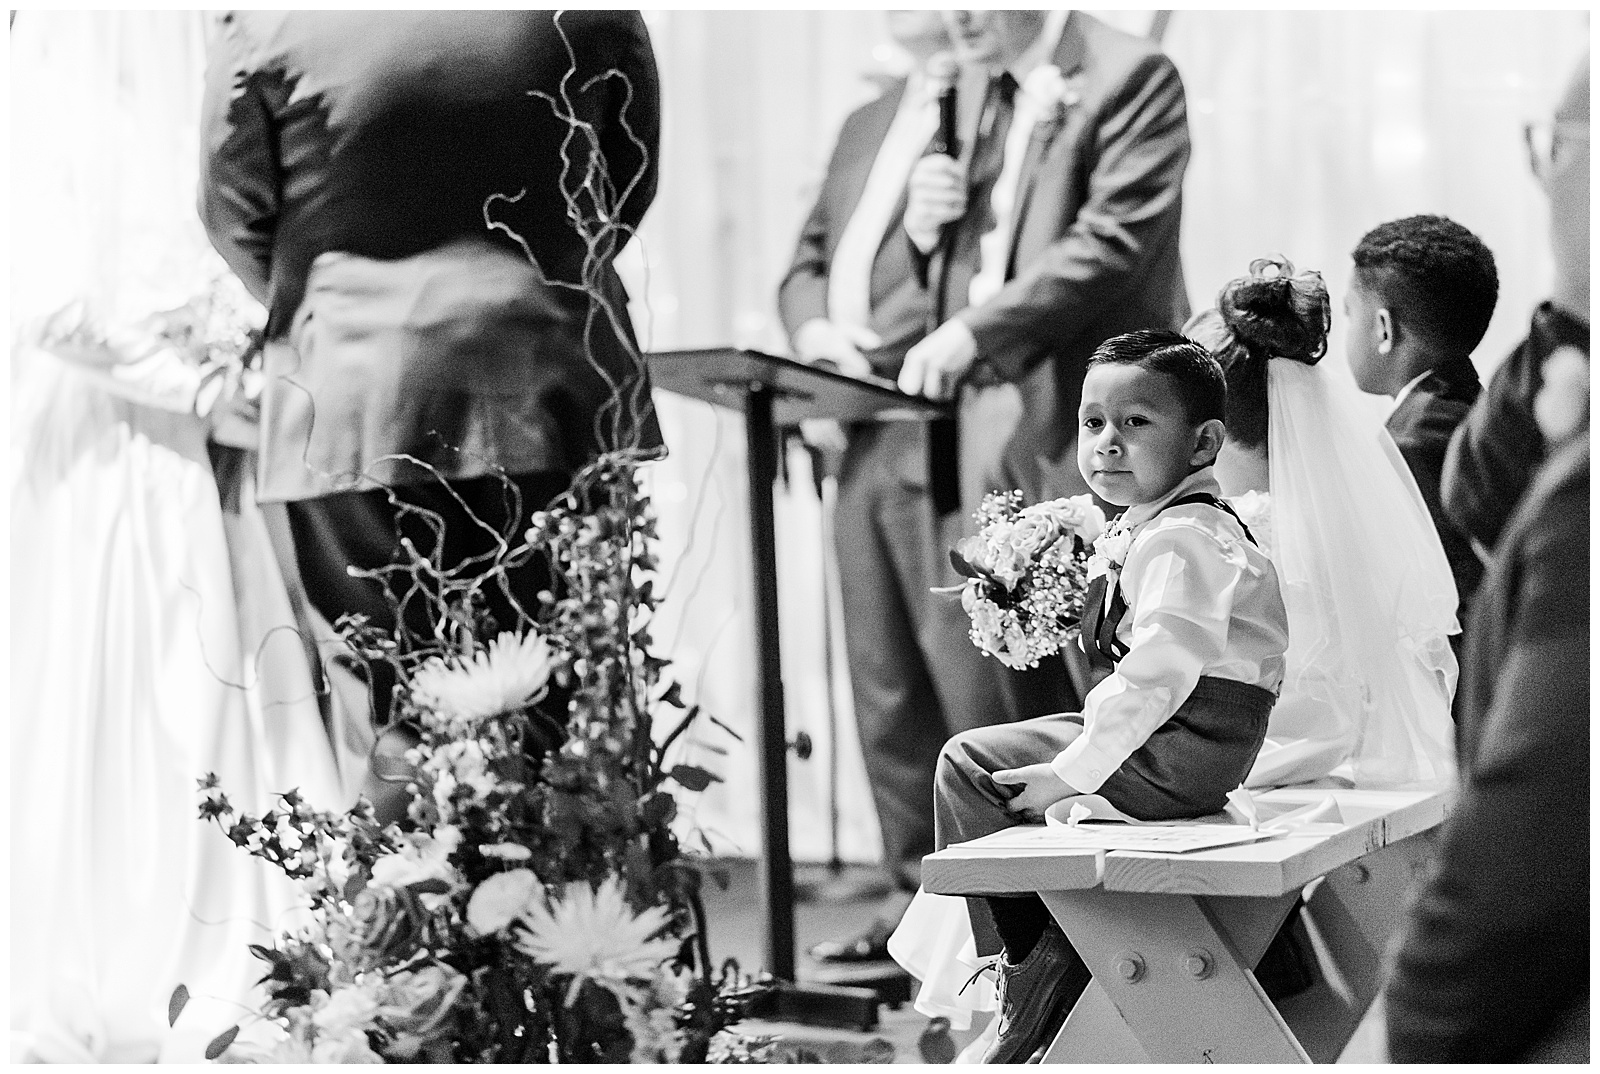 Boy looking out to crowd during ceremony